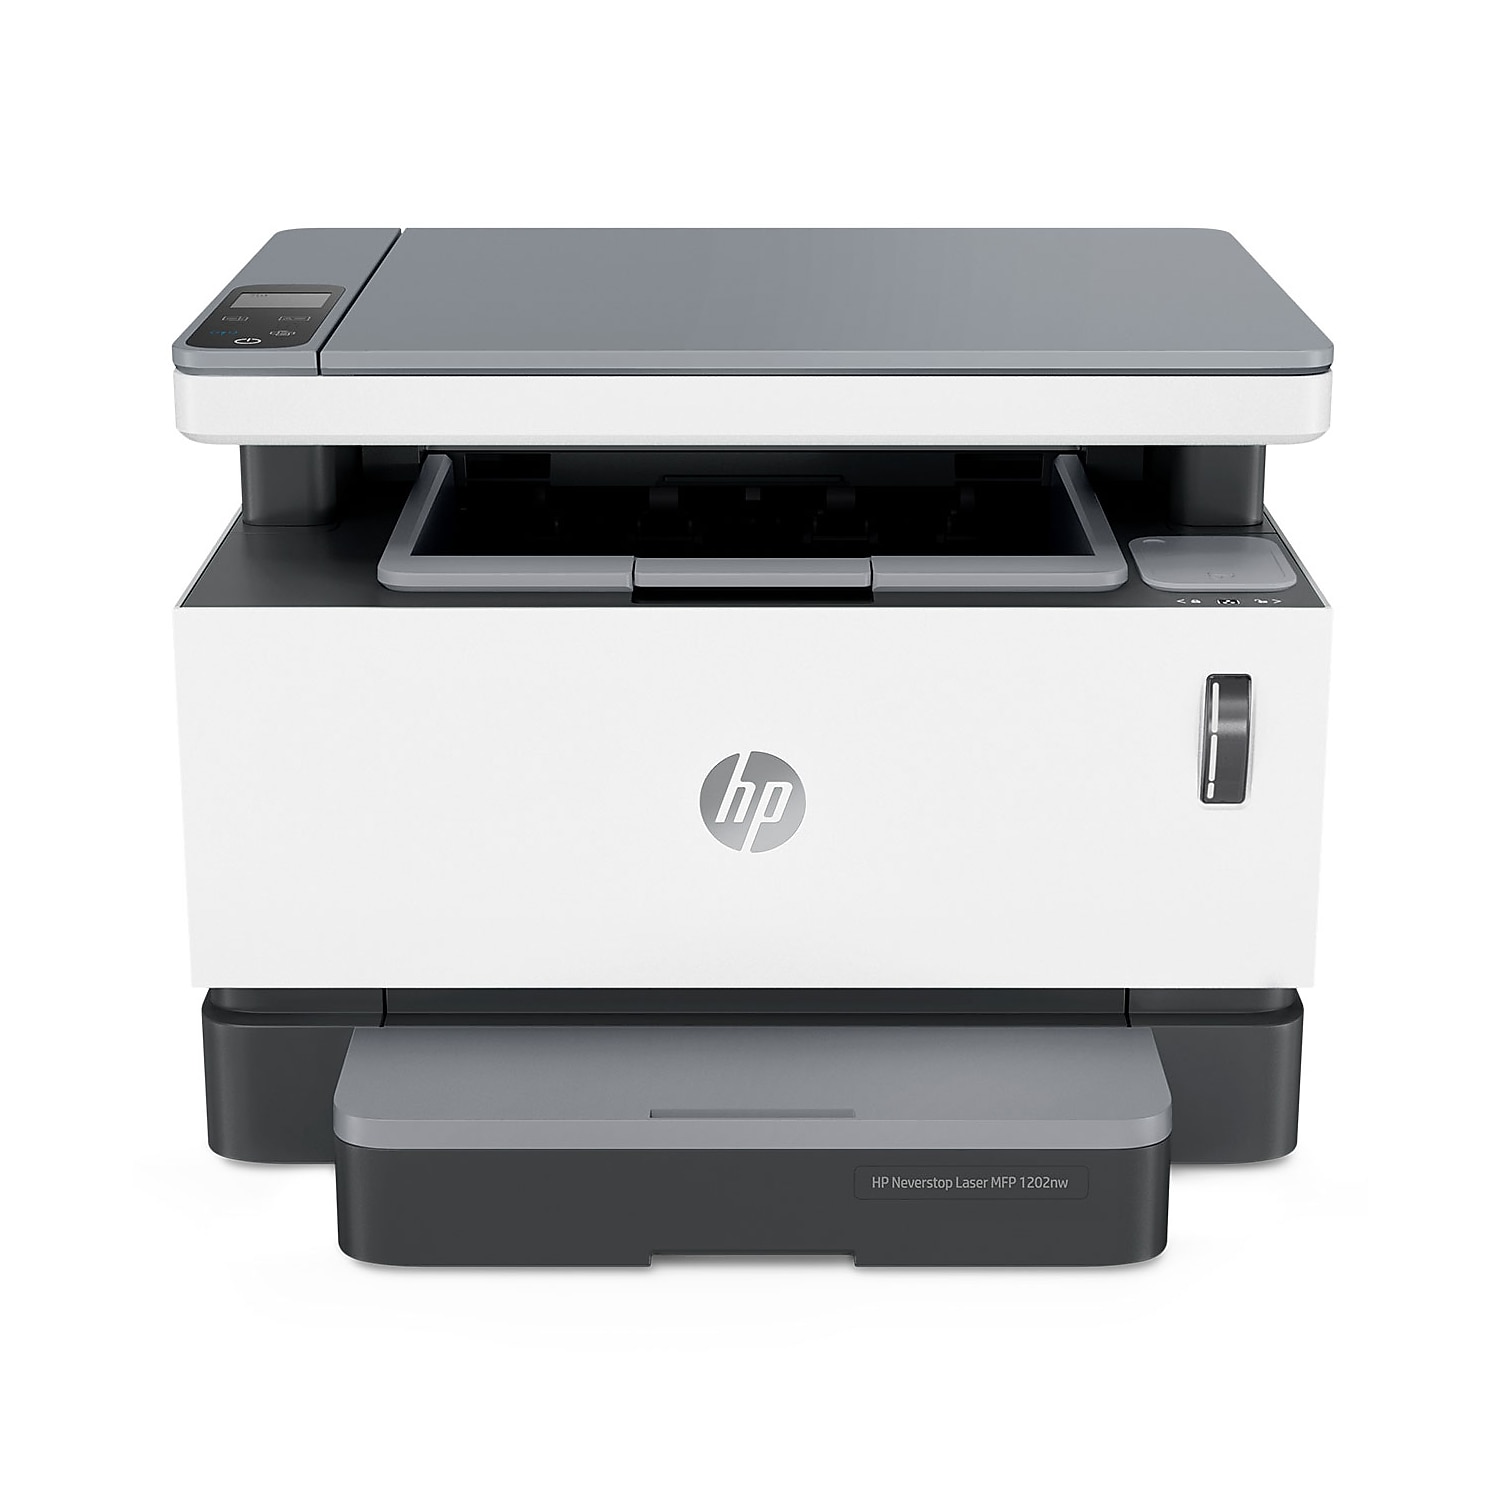 HP Neverstop MFP 1202w Wireless Laser All-In-One Refillable Tank Monochrome Printer - image 1 of 9